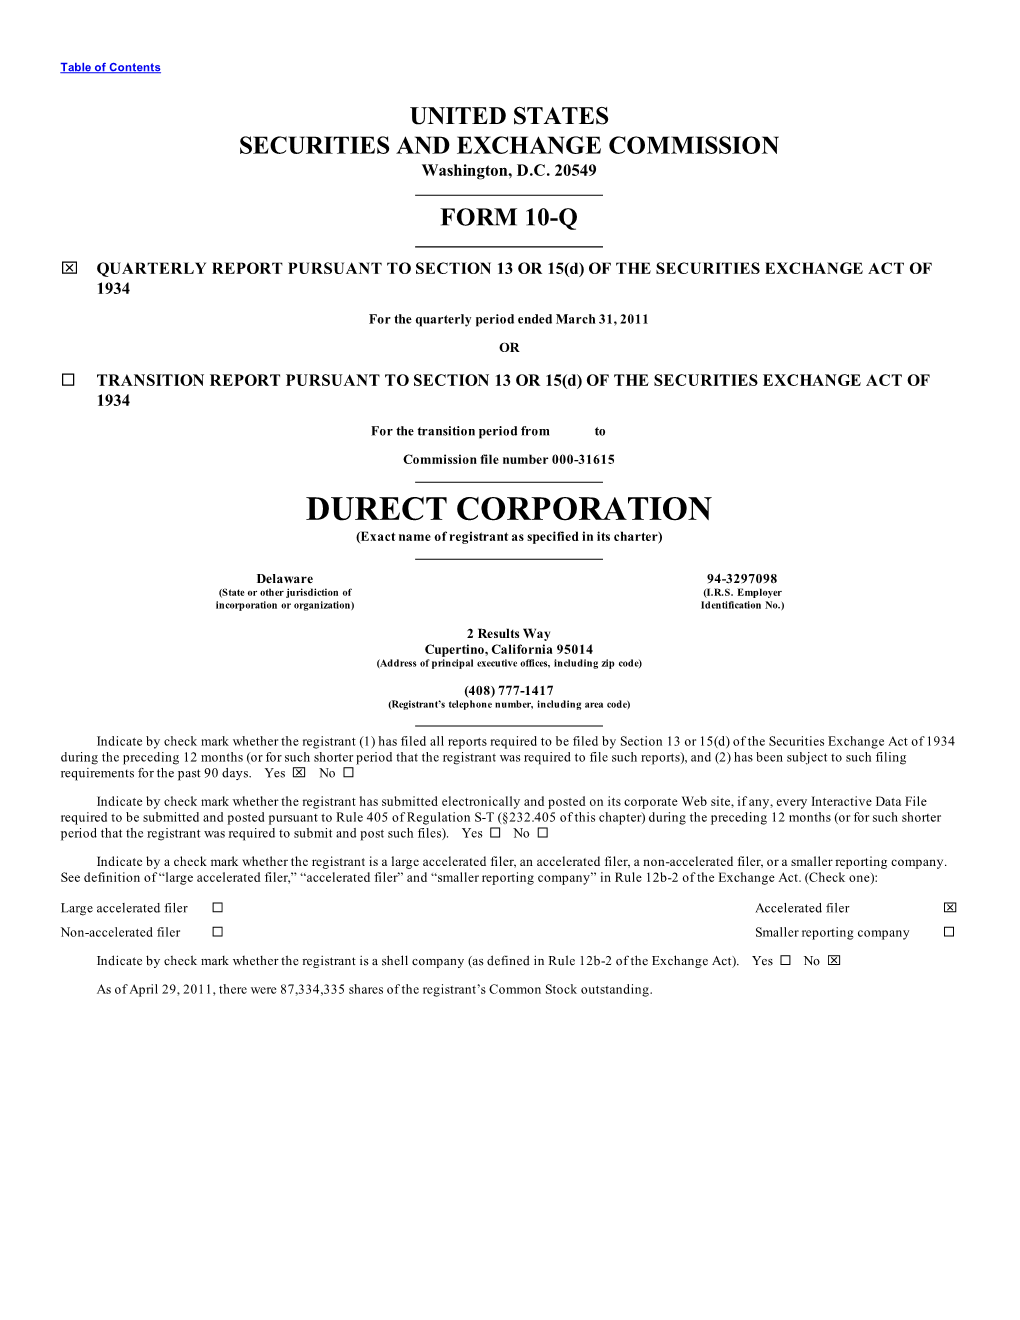 DURECT CORPORATION (Exact Name of Registrant As Specified in Its Charter)